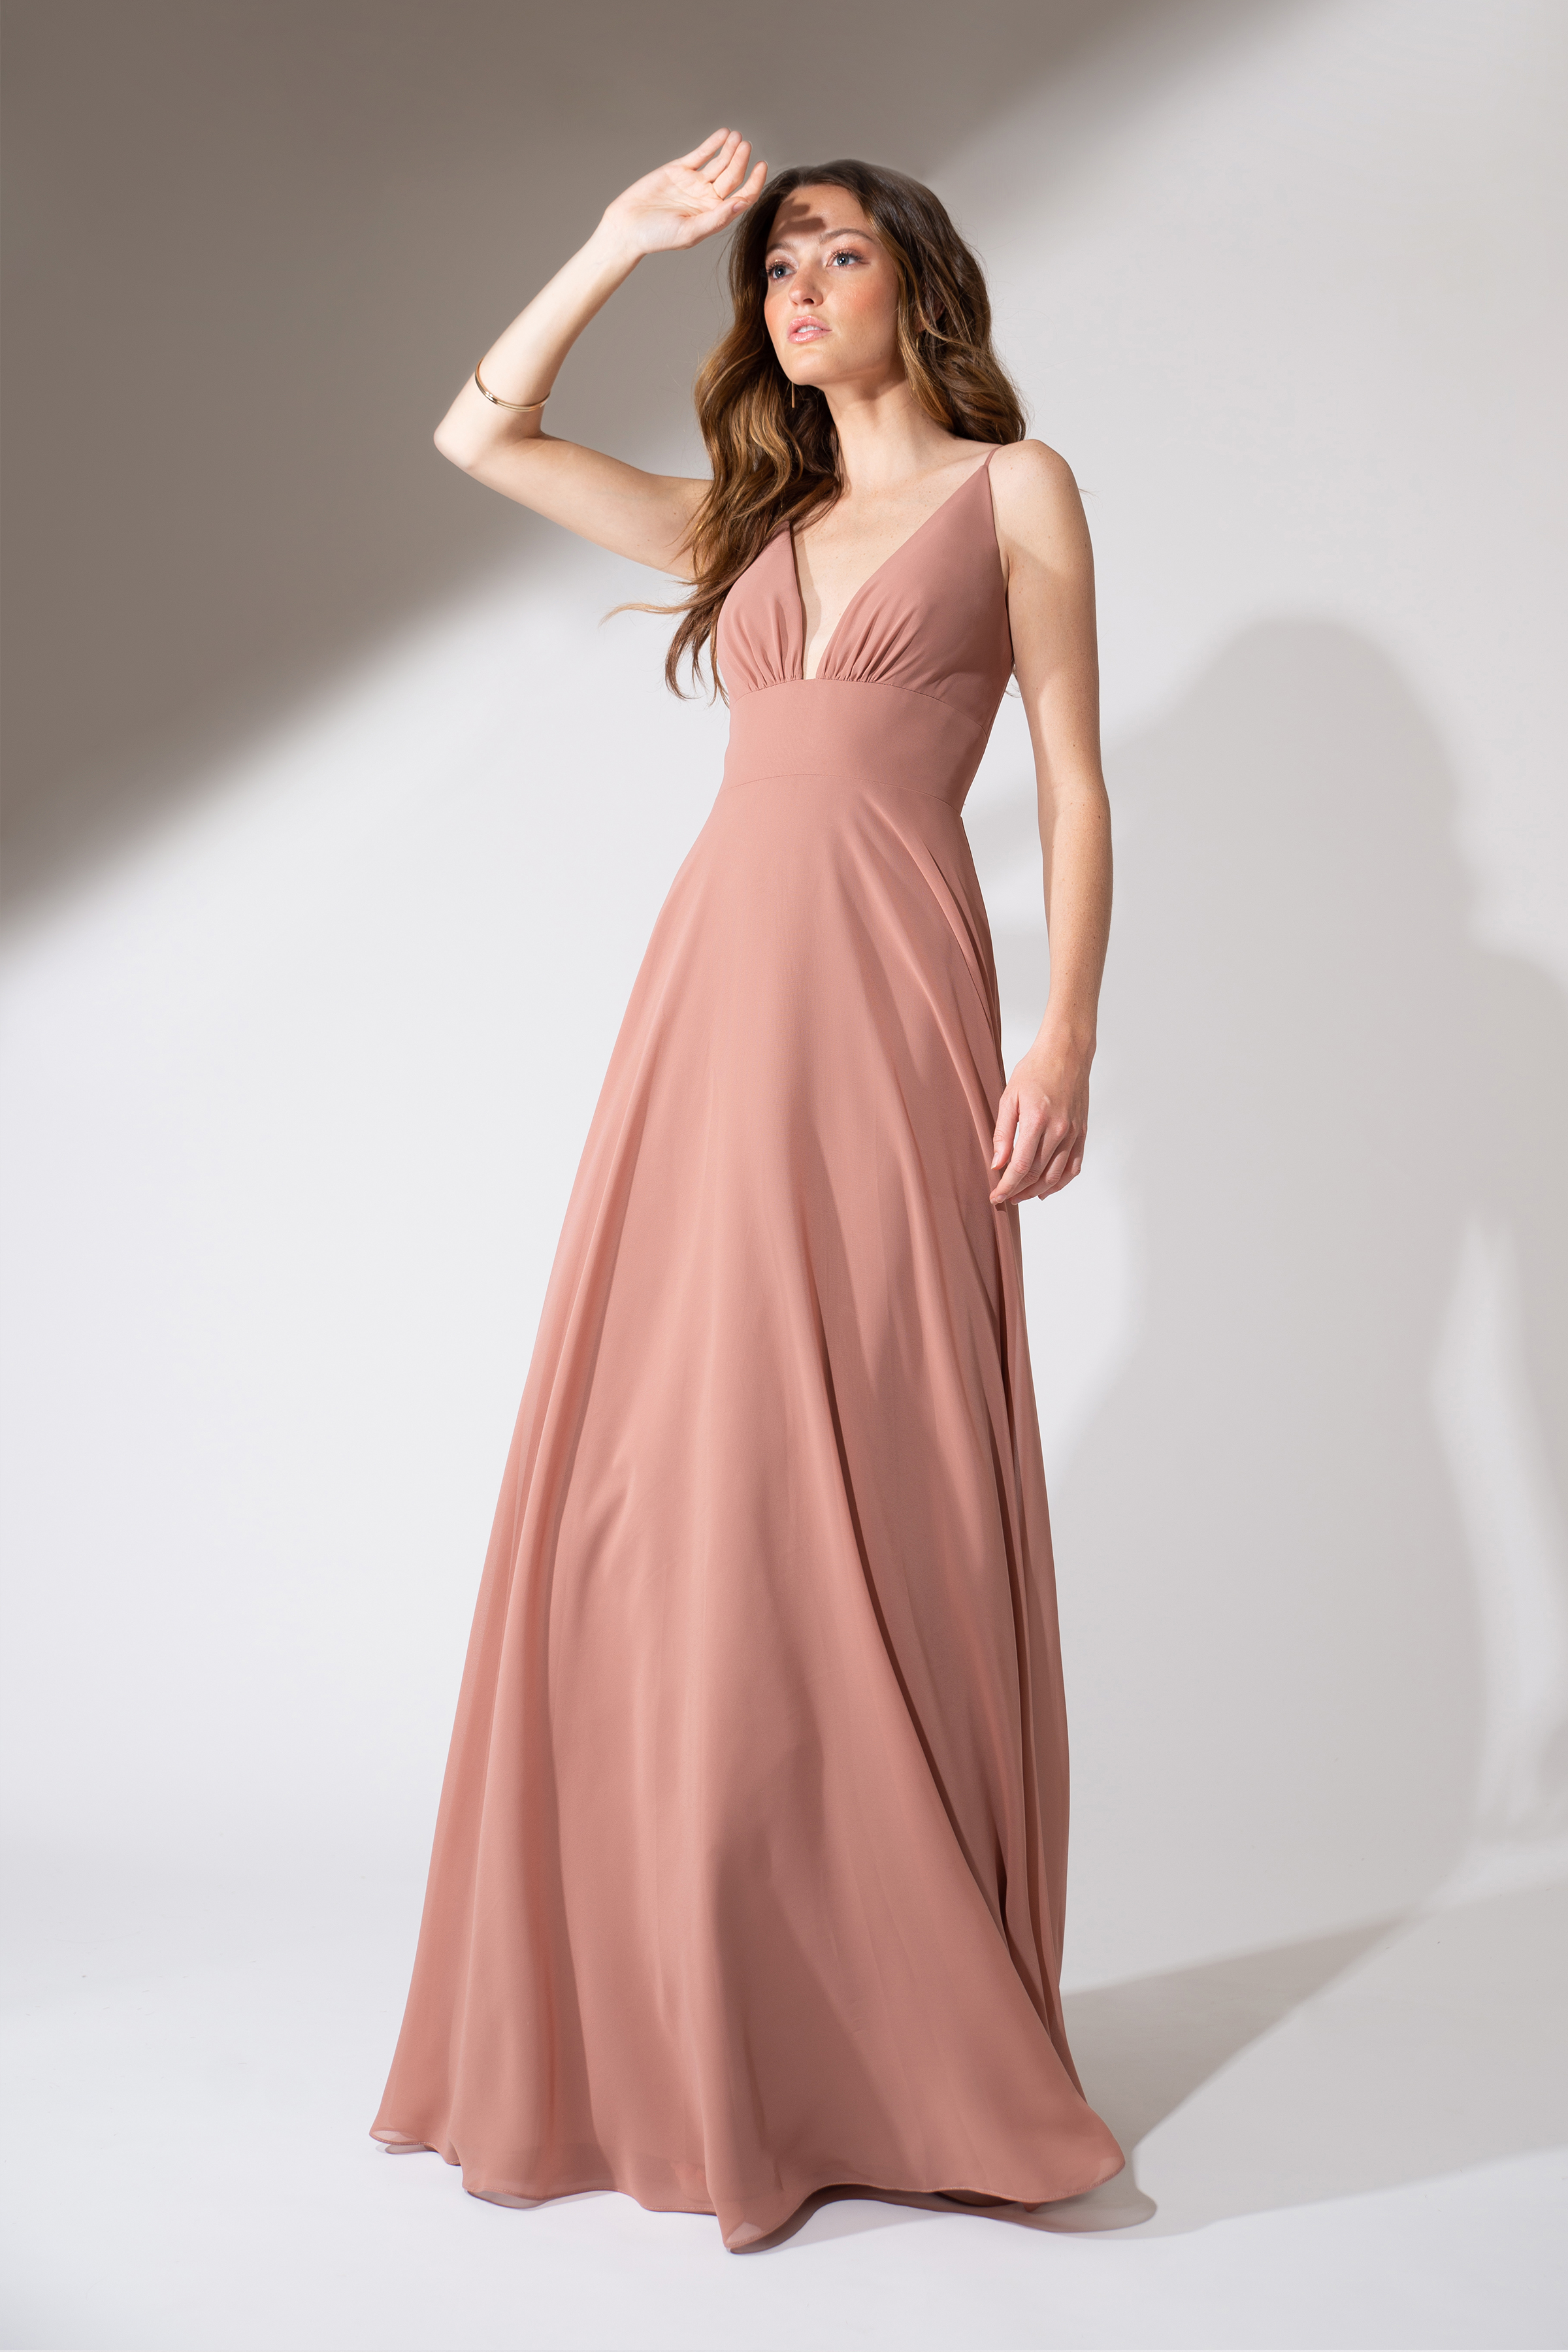 NEW $285 Jenny Yoo Inesse Gown Bridesmaid Dress in Blush 